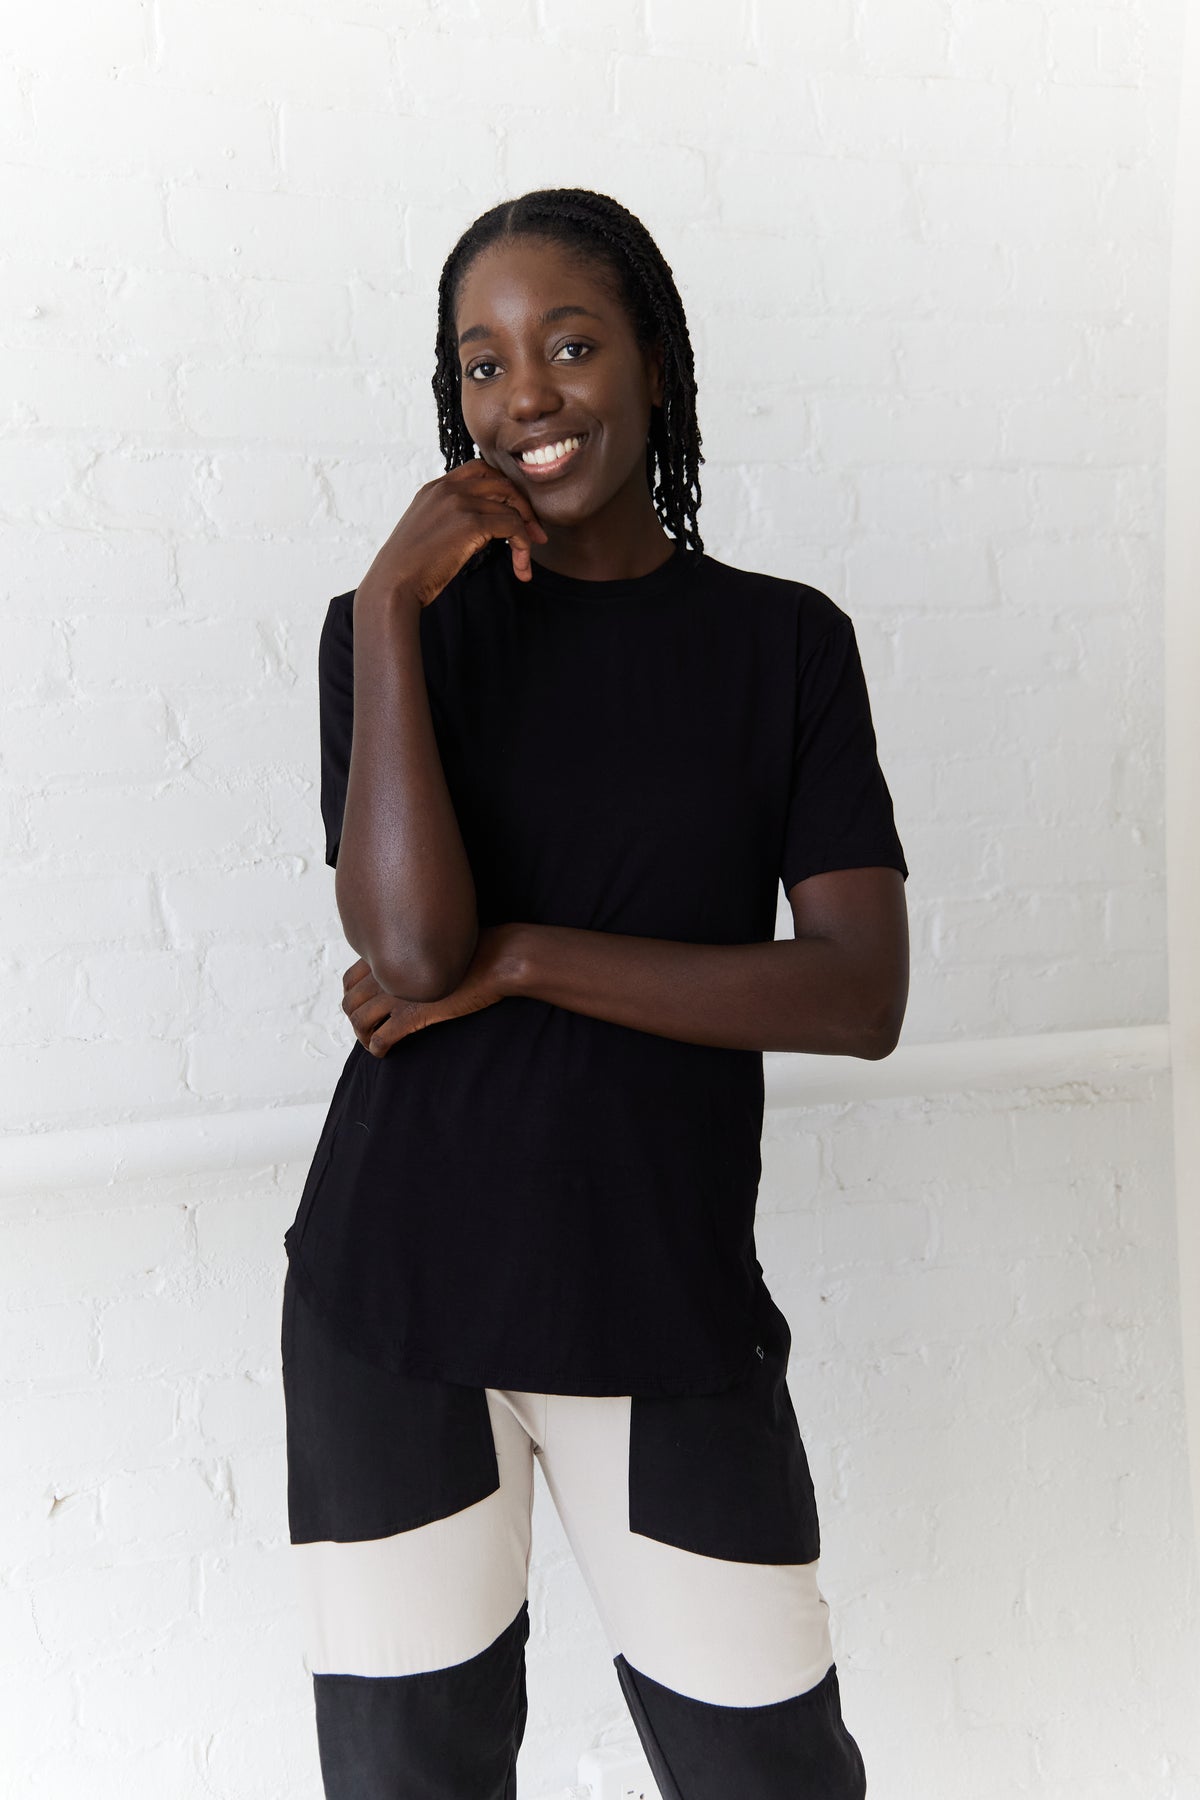 The Crew Neck - Black by Cassandra Elizabeth is an ethically made, minimalist wardrobe essential, and is the epitome of quiet luxury.